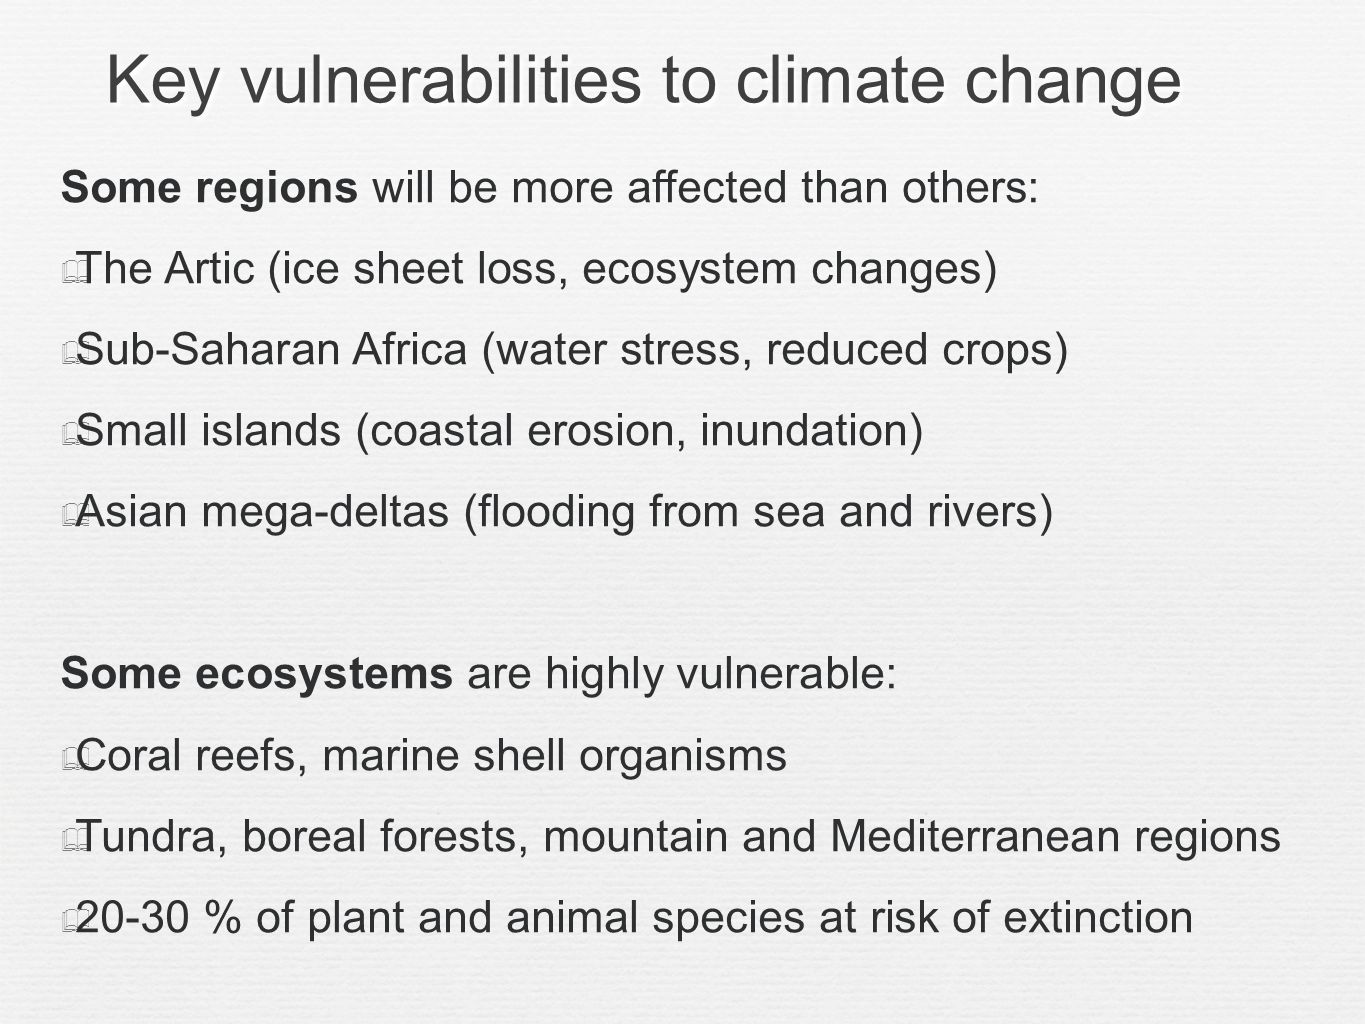 Key vulnerabilities to climate change Some regions will be more affected than others: The Artic (ice sheet loss, ecosystem changes) Sub-Saharan Africa (water stress, reduced crops) Small islands (coastal erosion, inundation) Asian mega-deltas (flooding from sea and rivers) Some ecosystems are highly vulnerable: Coral reefs, marine shell organisms Tundra, boreal forests, mountain and Mediterranean regions % of plant and animal species at risk of extinction